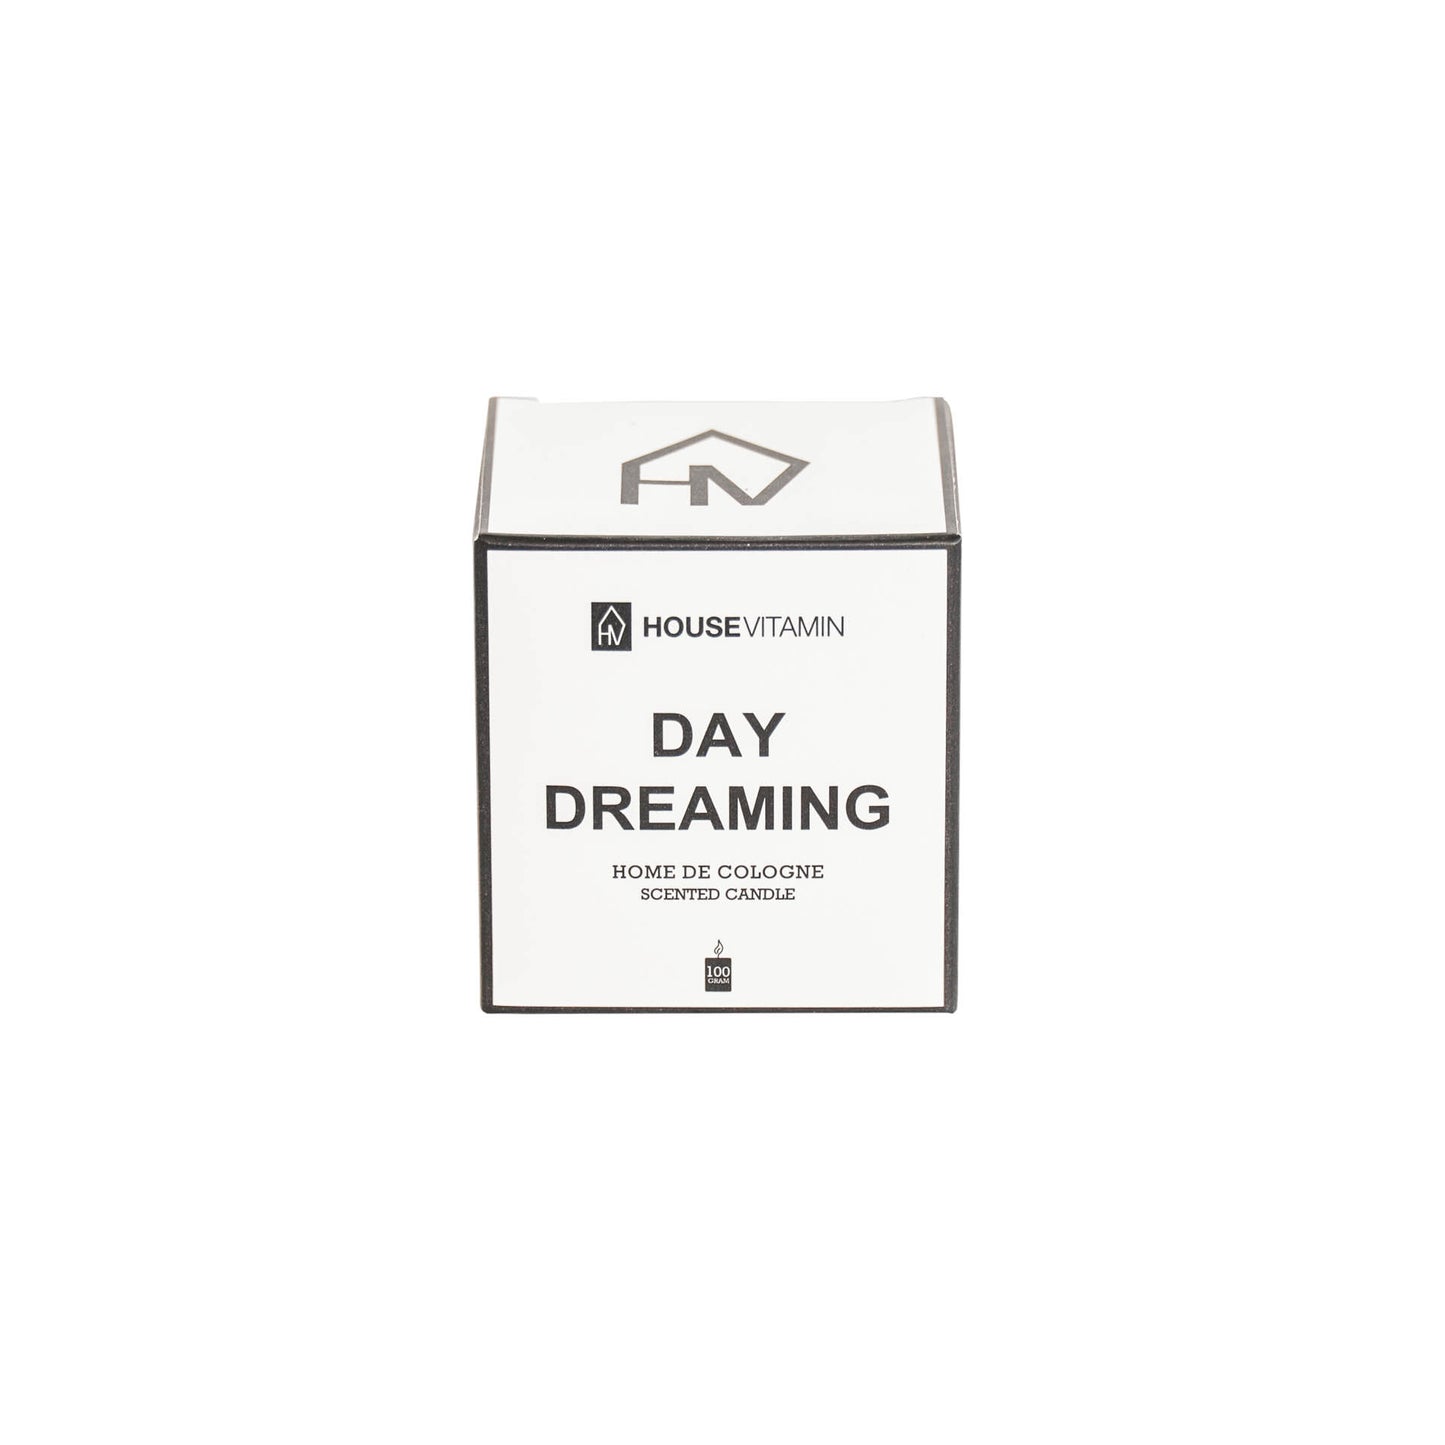 Scented Candle - Perfumed Wax - 100gr - Day Dreaming